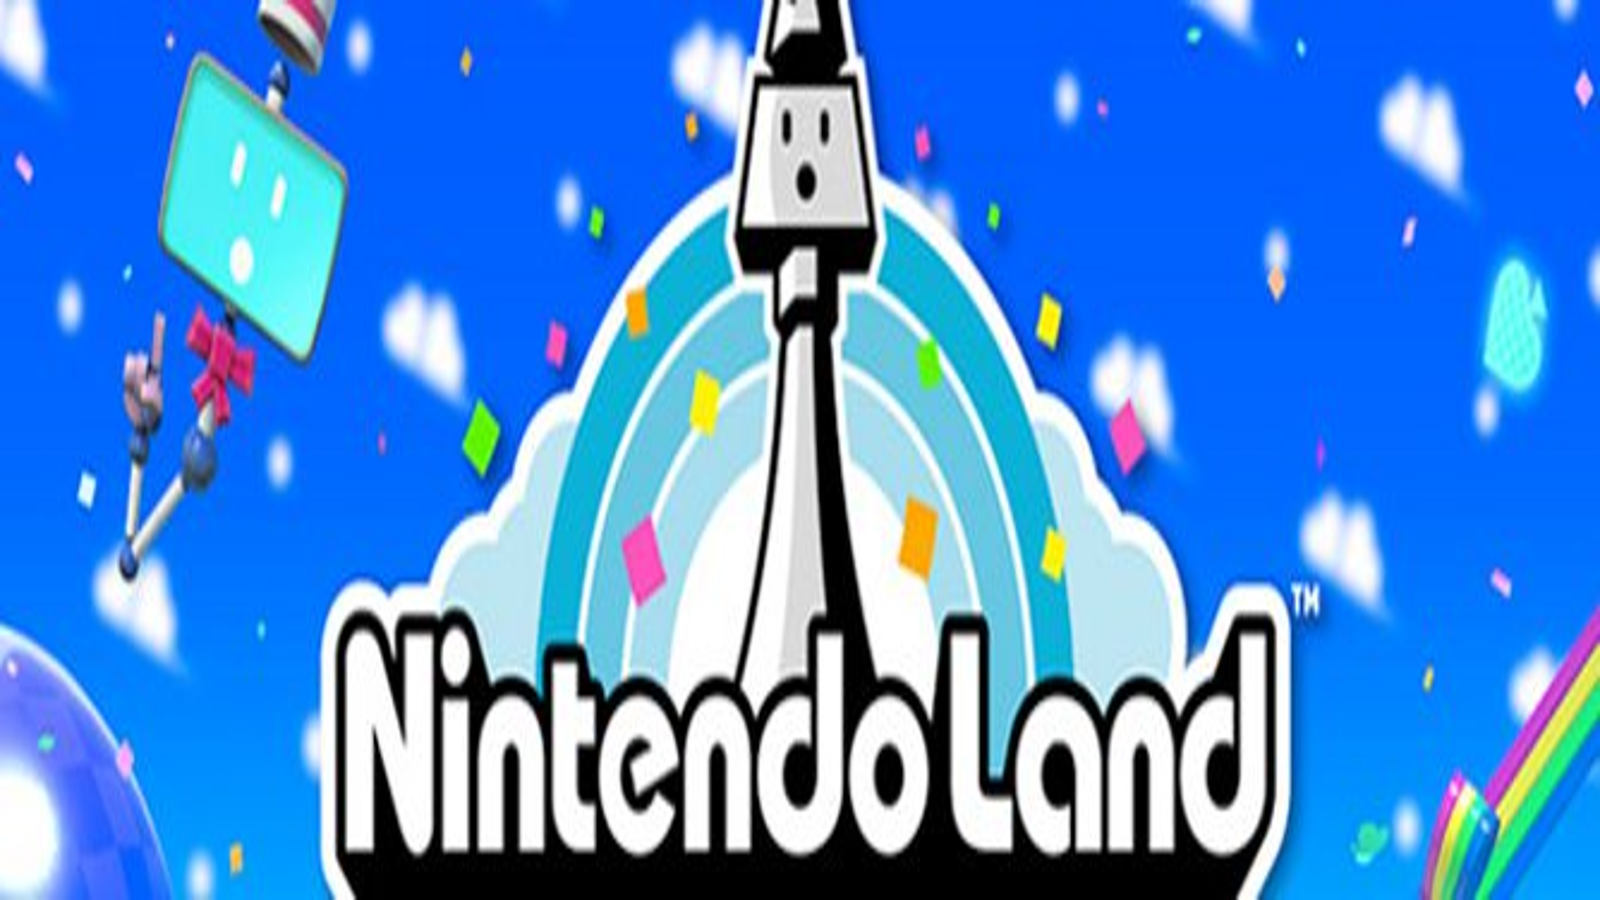 Nintendo Land' removed from Wii U eShop